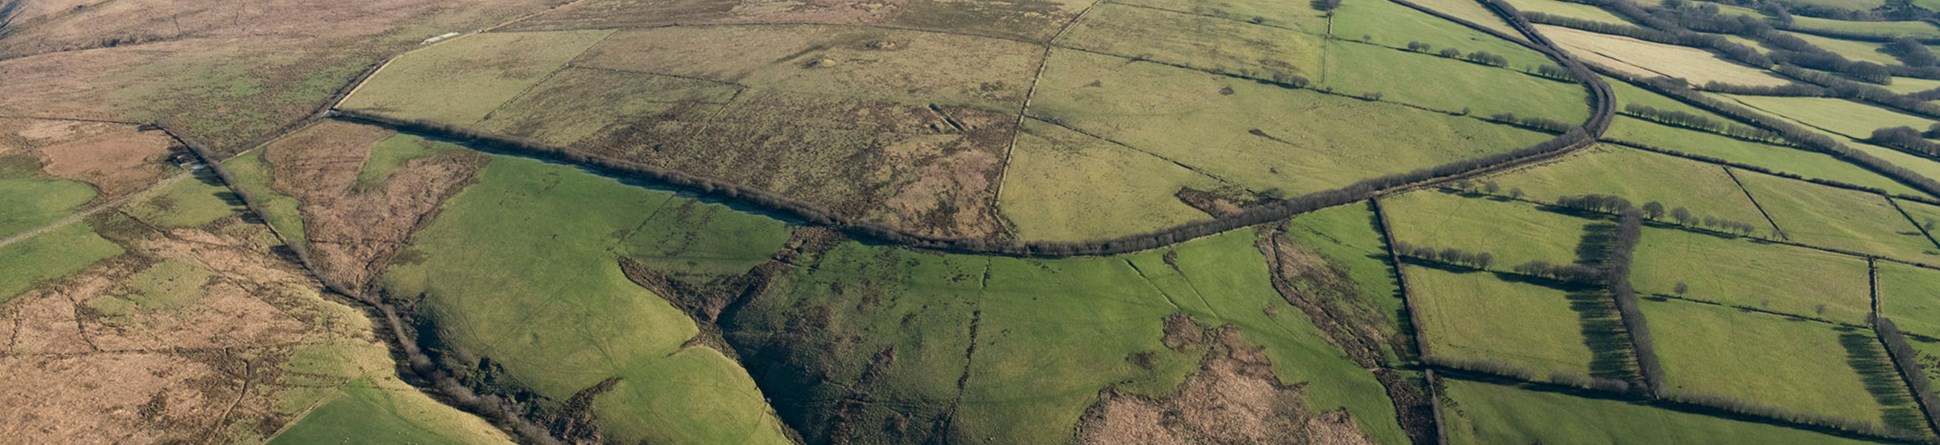 An aerial view of a hilly moorland landscape.